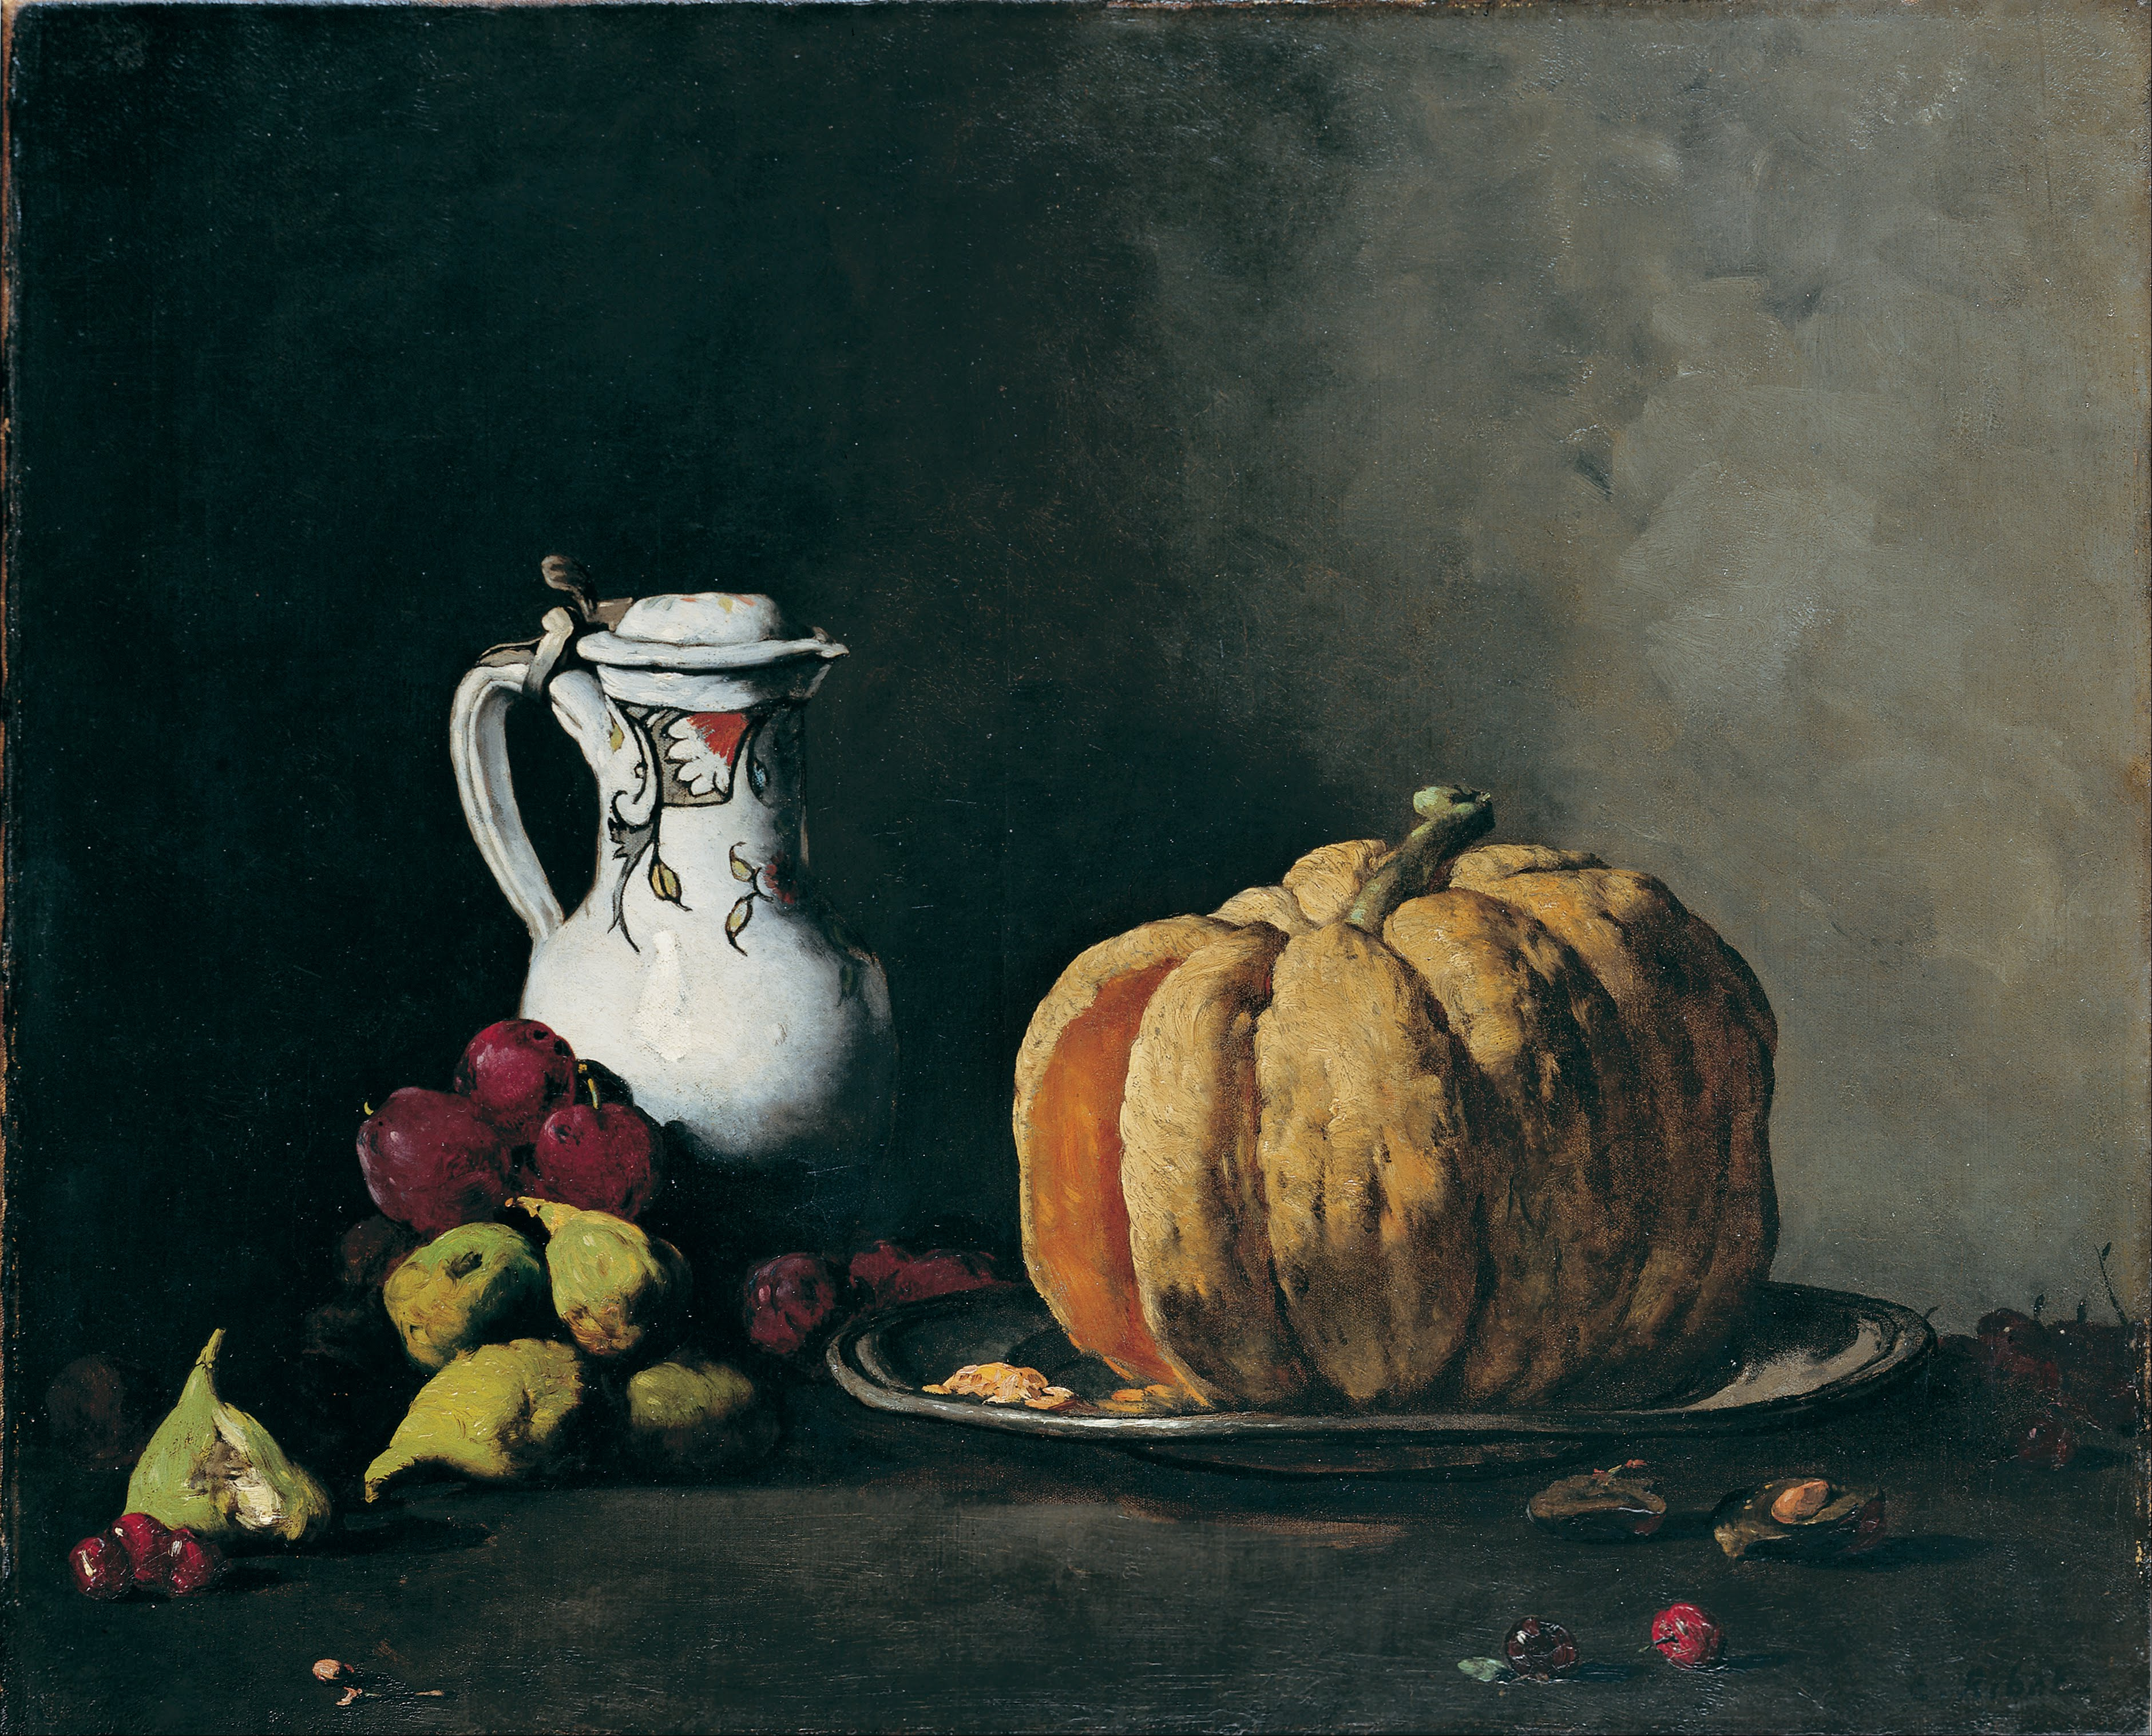 0691_Theodule-Augustin Ribot_Still Life with Pumpkin, Plums, Cherries, Figs and Jug 썸네일